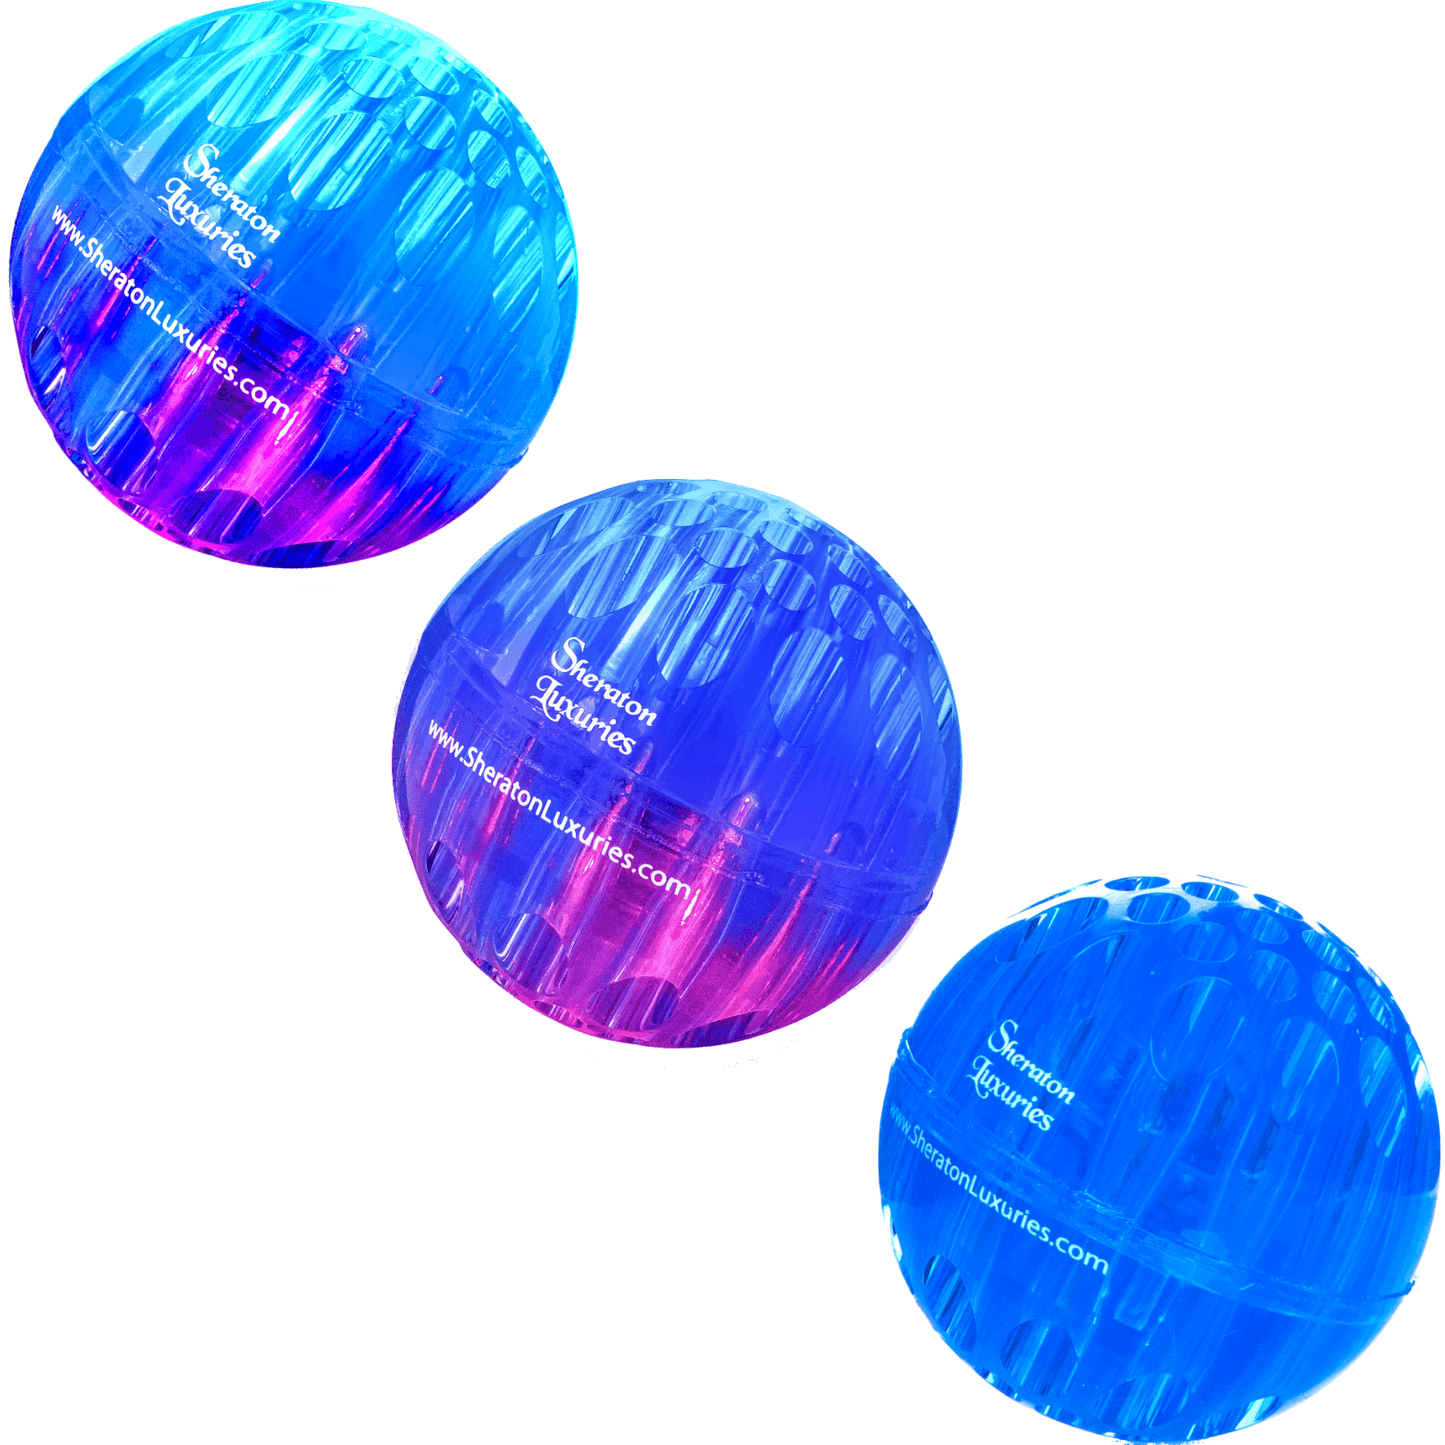 1 Dog Ball Toys+Light Up Dog Toys-Sound Toys-Tough Bouncing Balls for Dogs, Pet Toys For Blind & Old Dogs